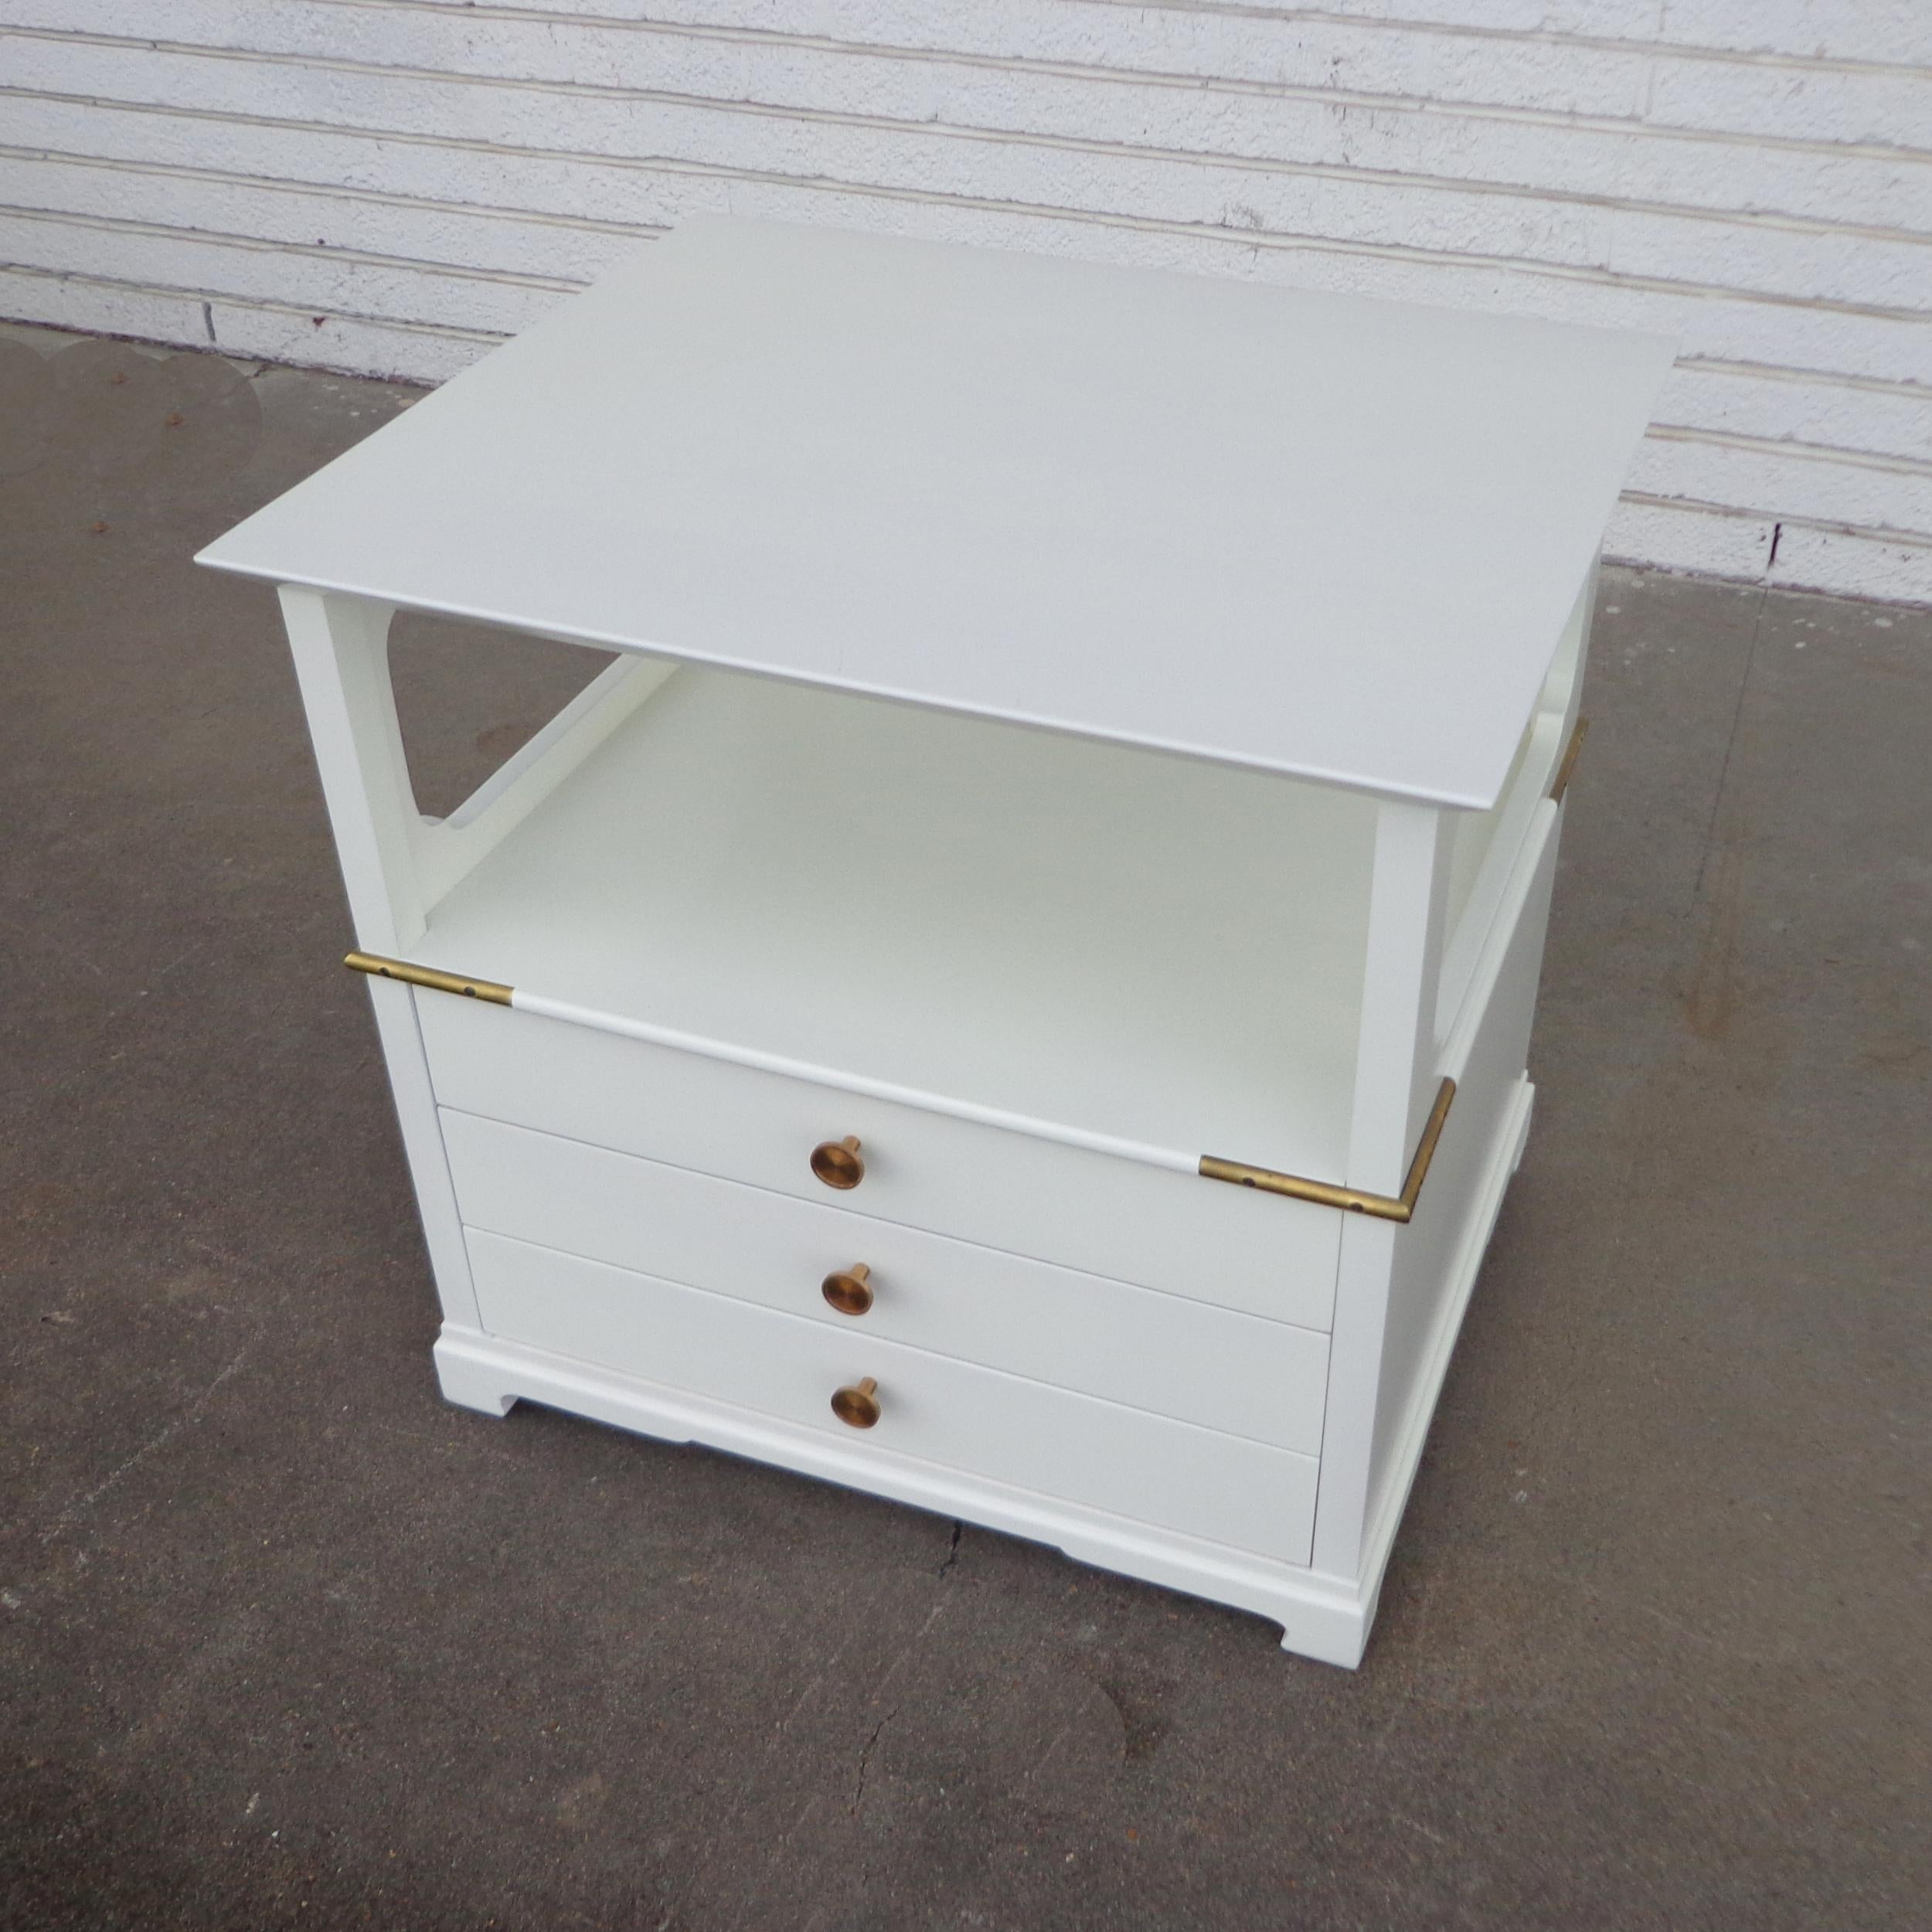 Pair of nightstands by Renzo Rutili for Johnson Furniture Co

Restored in white lacquer over mahogany cases, these stunning two-tier nightstands feature open shelves and 3 drawers. Original brass pulls and wrap around brass details.

We have 2